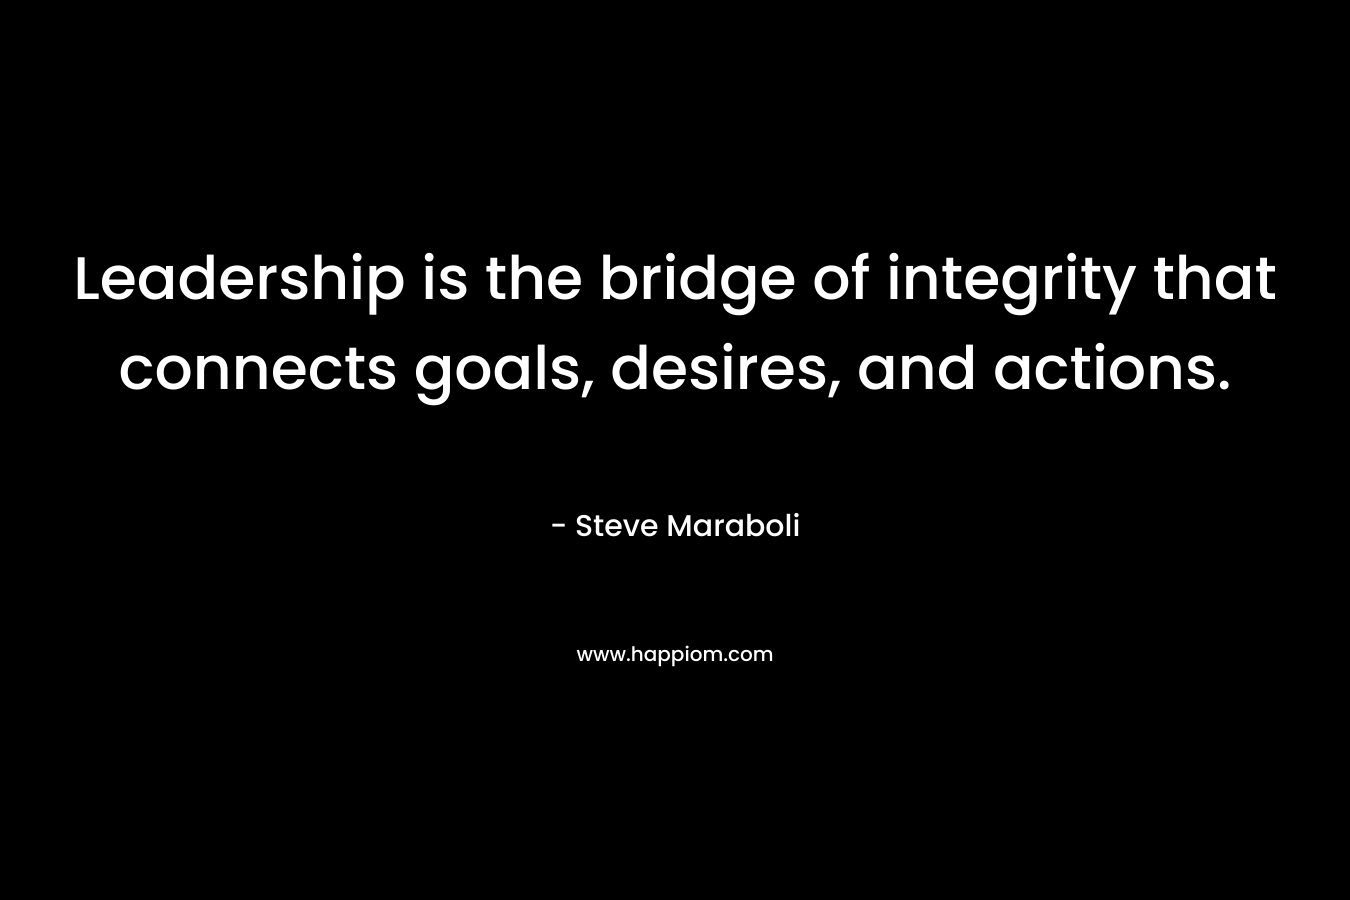 Leadership is the bridge of integrity that connects goals, desires, and actions.